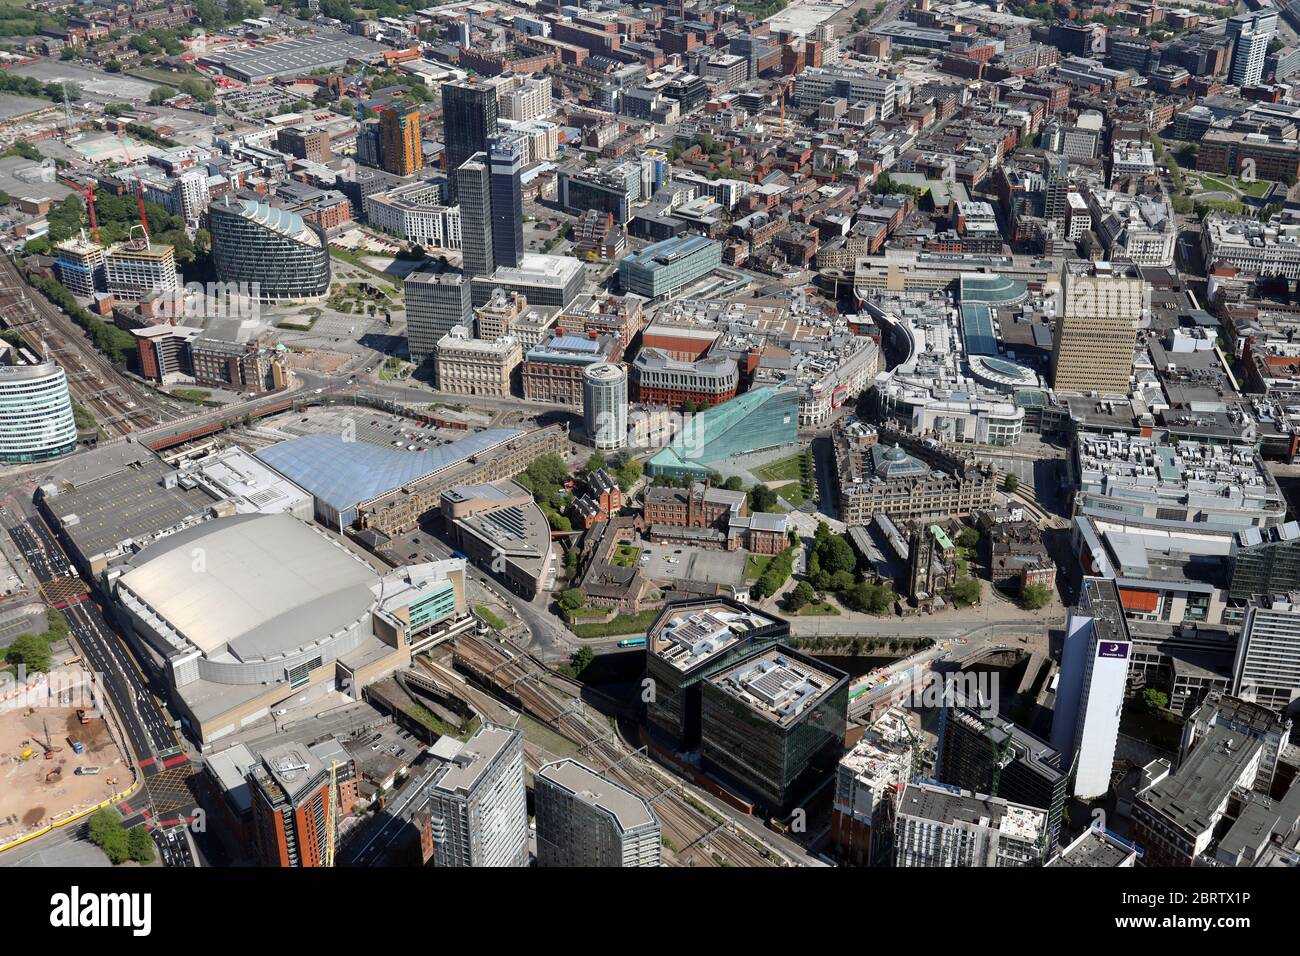 aerial view of Manchester city centre with the Arena, Victoria Station, Cathedral & National Football Museum all prominent Stock Photo